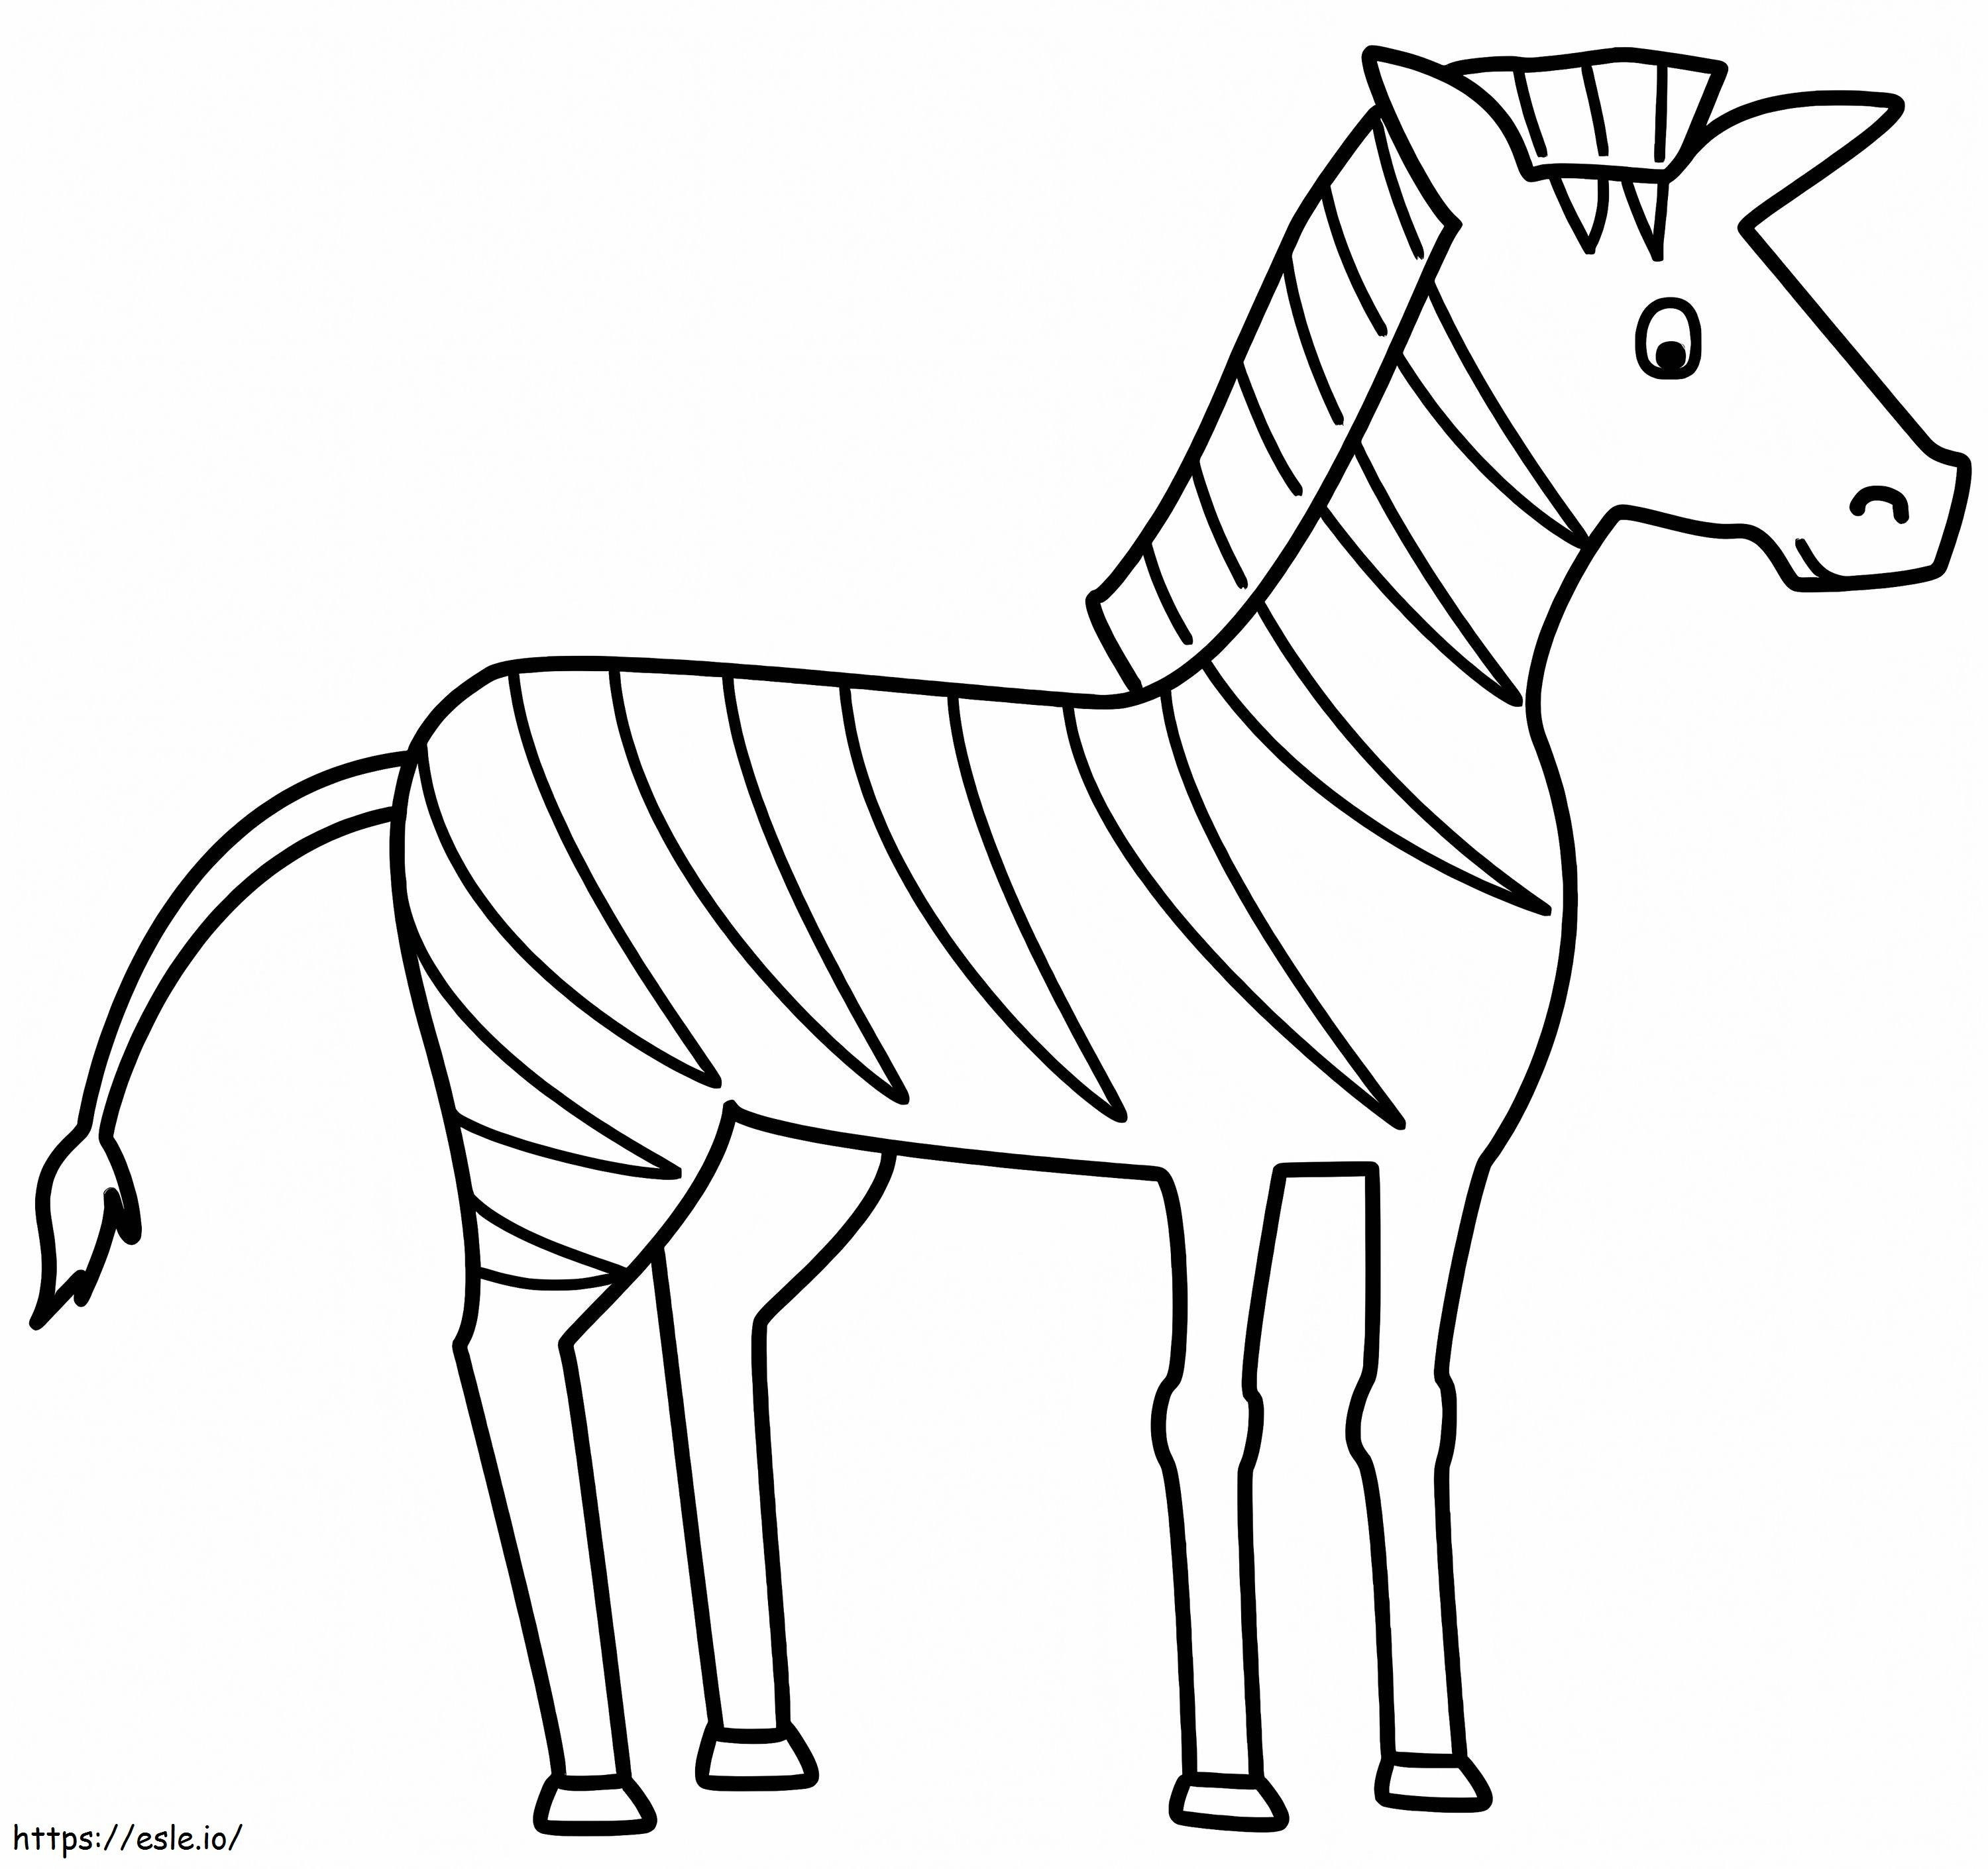 Basic Drawing Zebra coloring page